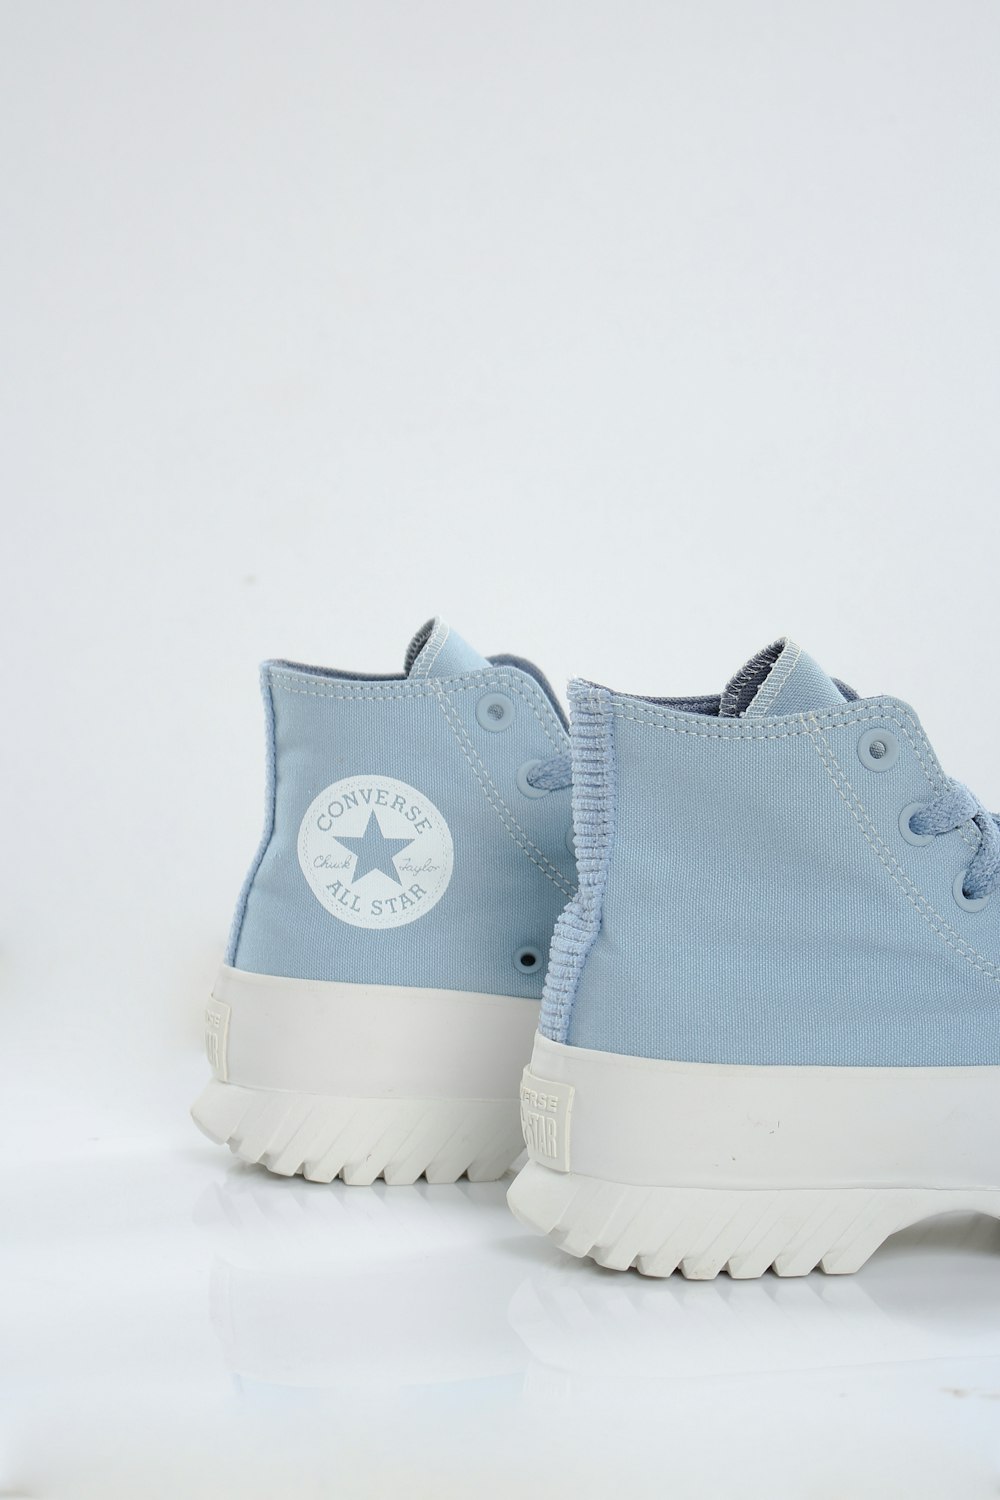 a pair of blue converse sneakers on a white background